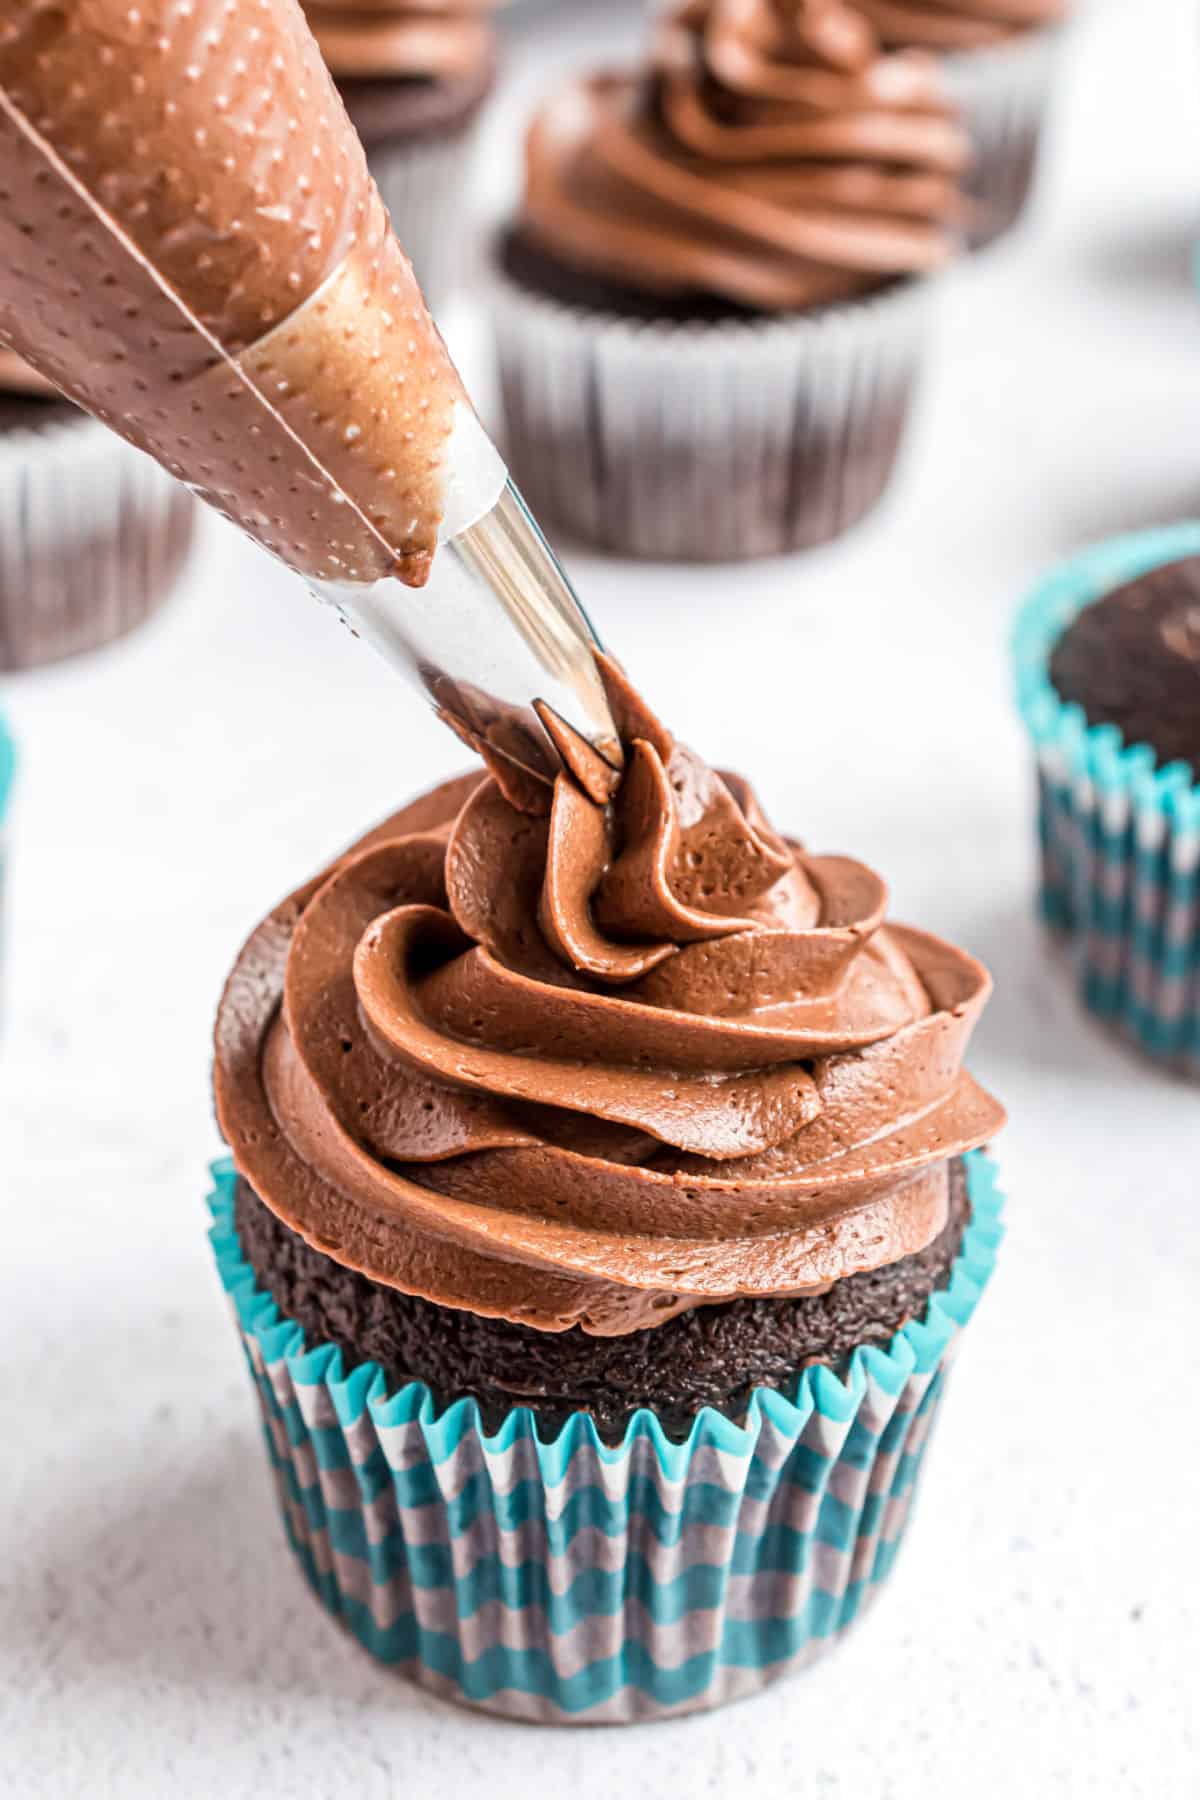 Chocolate cupcake with chocolate frosting being piped on top.